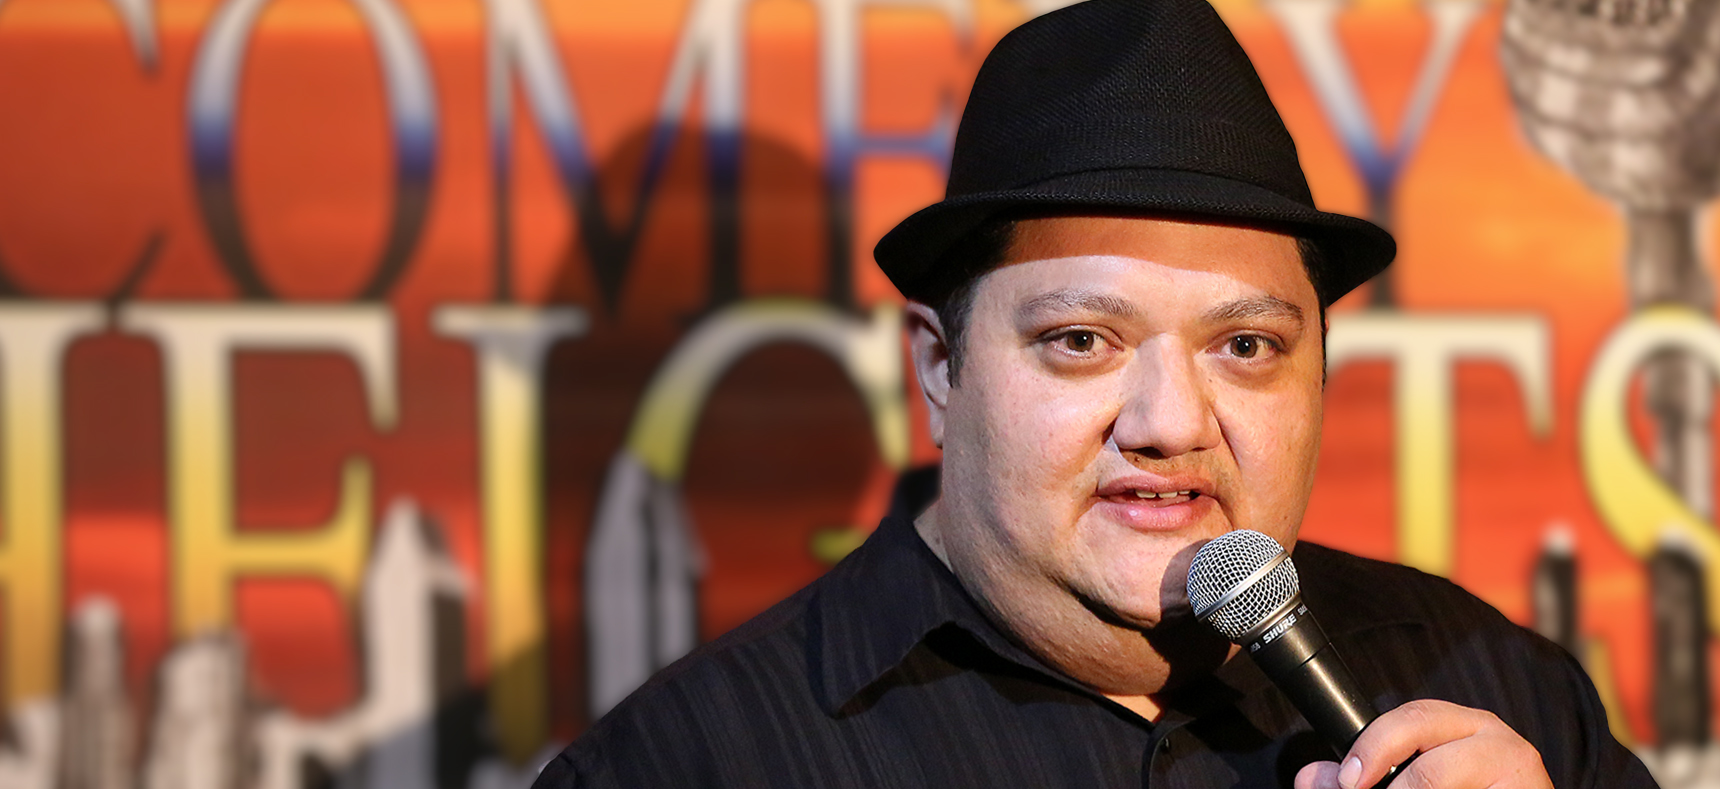 Our own Al Gavi headlines this weekend at Comedy Heights at Bay Bridge Brewing.